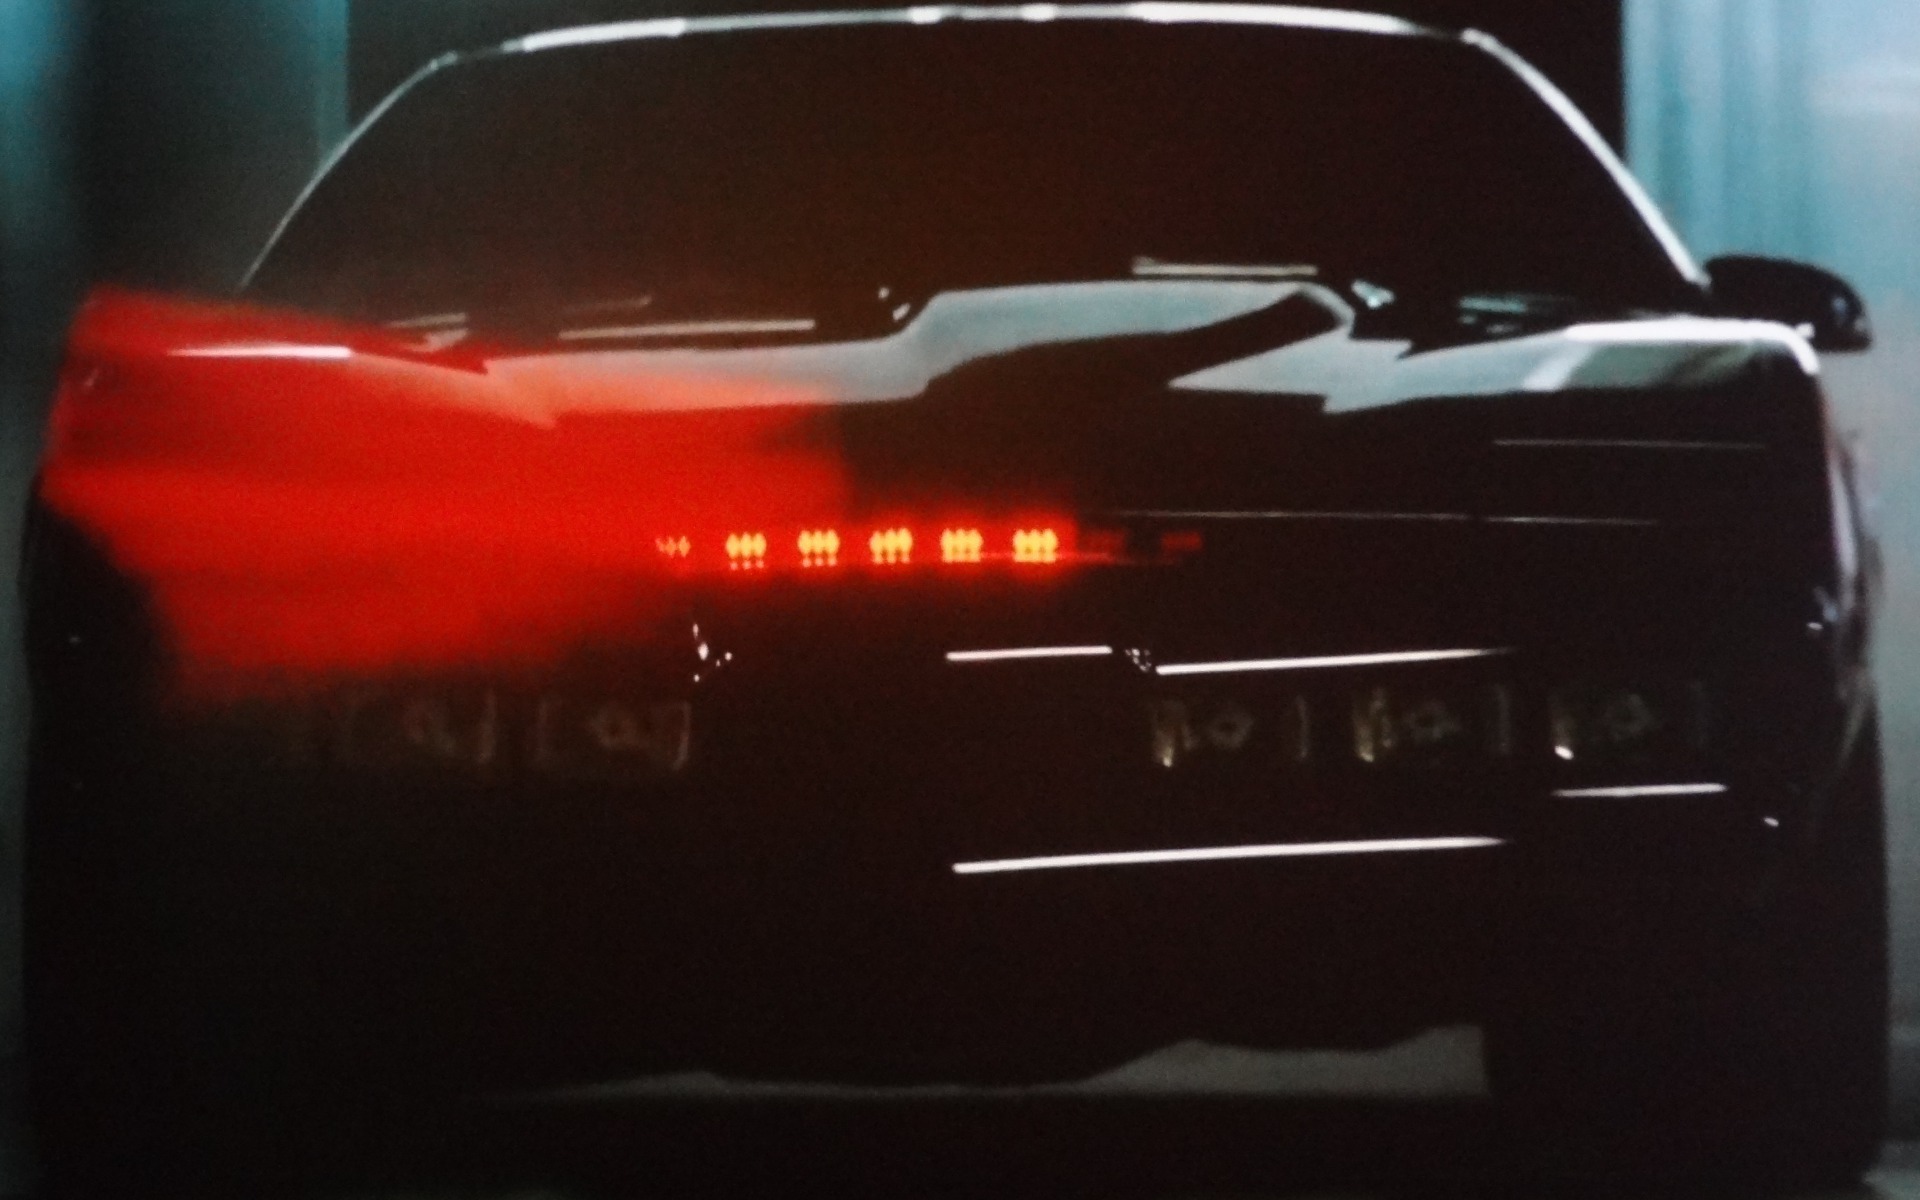 The Knight Industries Two Thousand Knight Rider KITT Trans Am